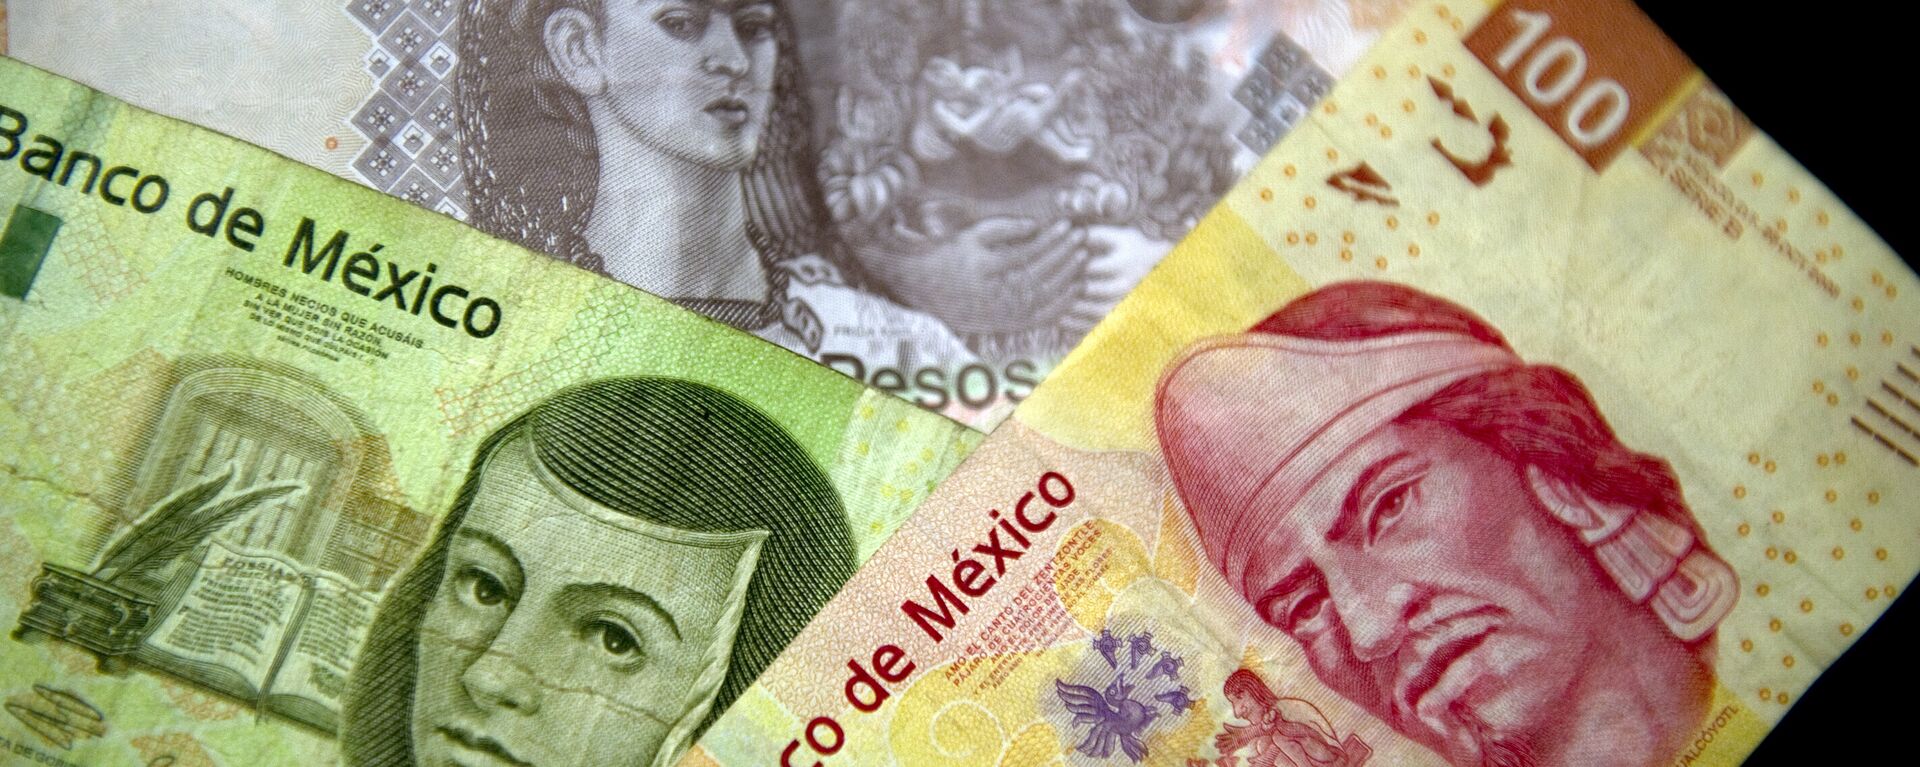 Picture of Mexican Peso notes of different denominations taken on December 27, 2011 in Mexico City - Sputnik Mundo, 1920, 21.10.2021